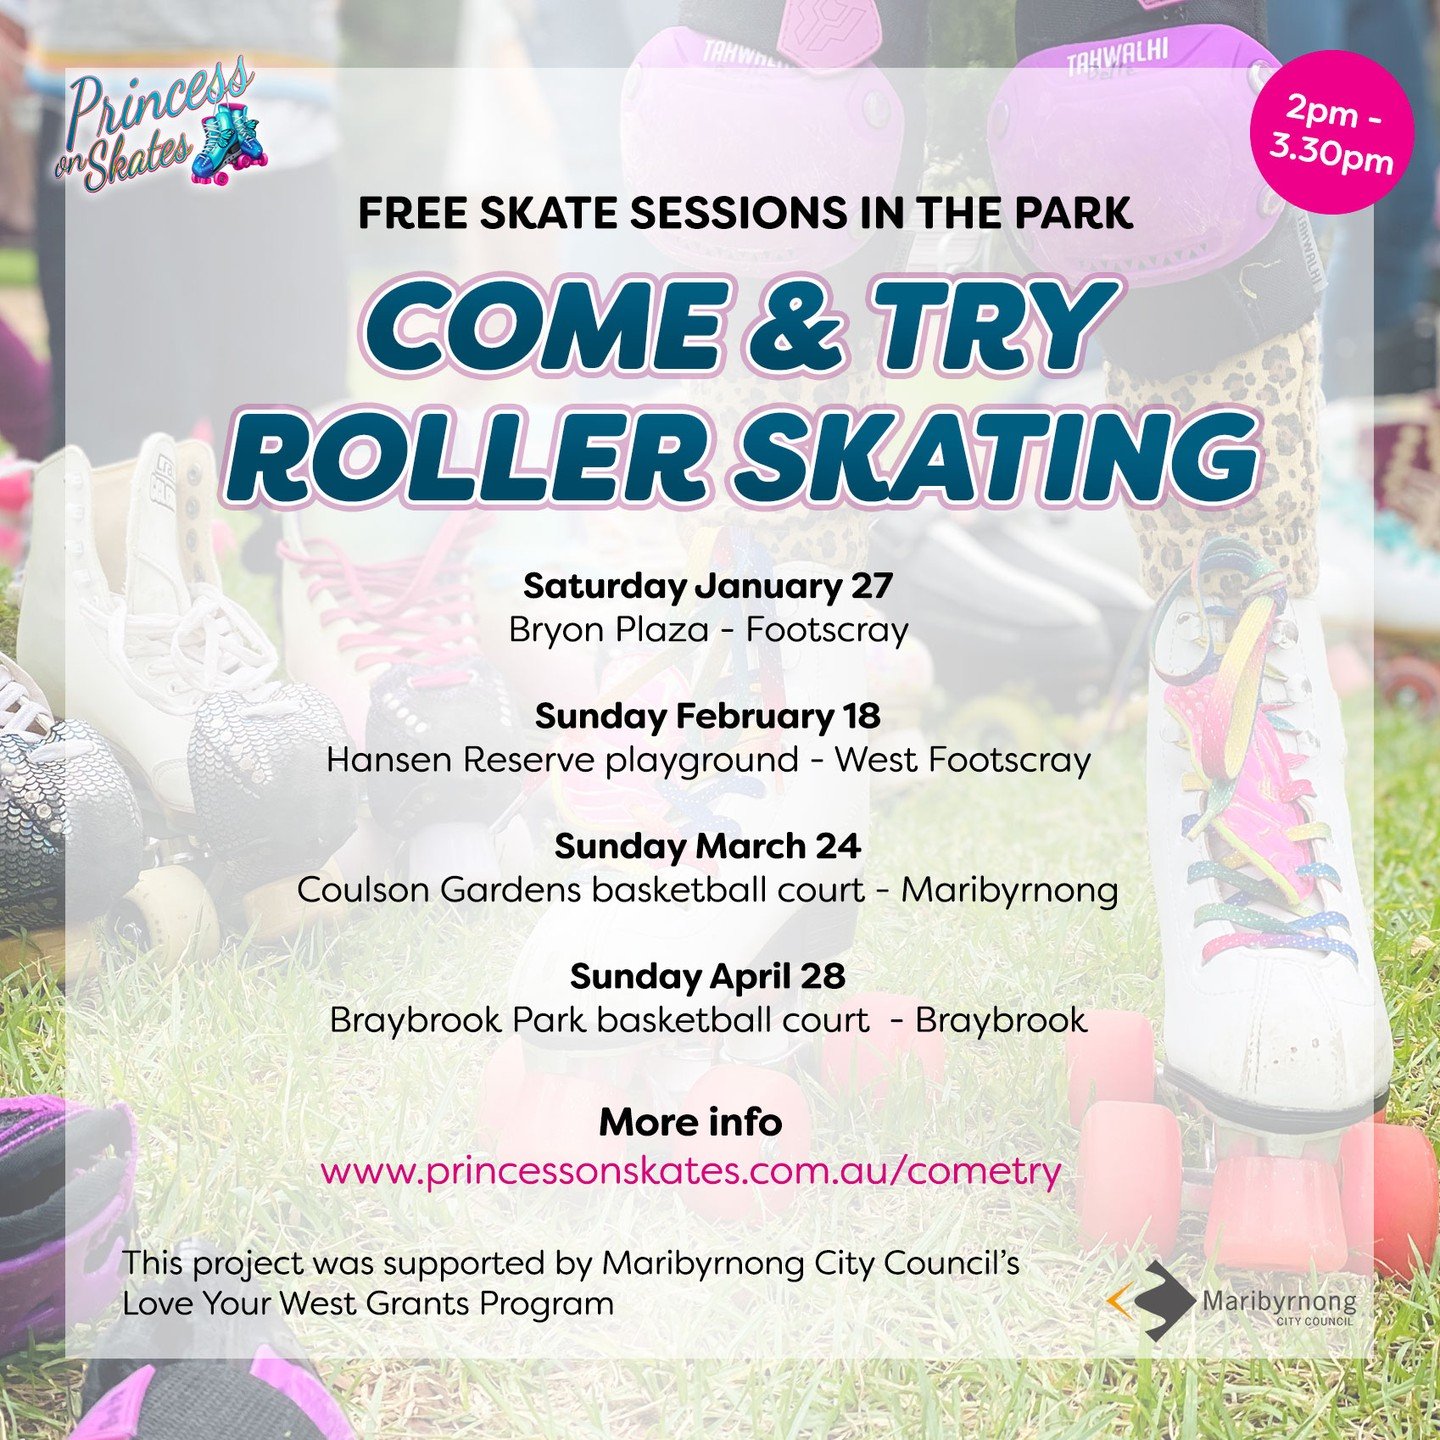 The last council funded Come and Try Roller Skating is Sunday 28 April in Braybrook Park basketball court!! 2-3.30pm

🛼 Roller skates from toddler size - mens 11 and protective gear, available for you to try
🛼 Three skate instructors to help out th